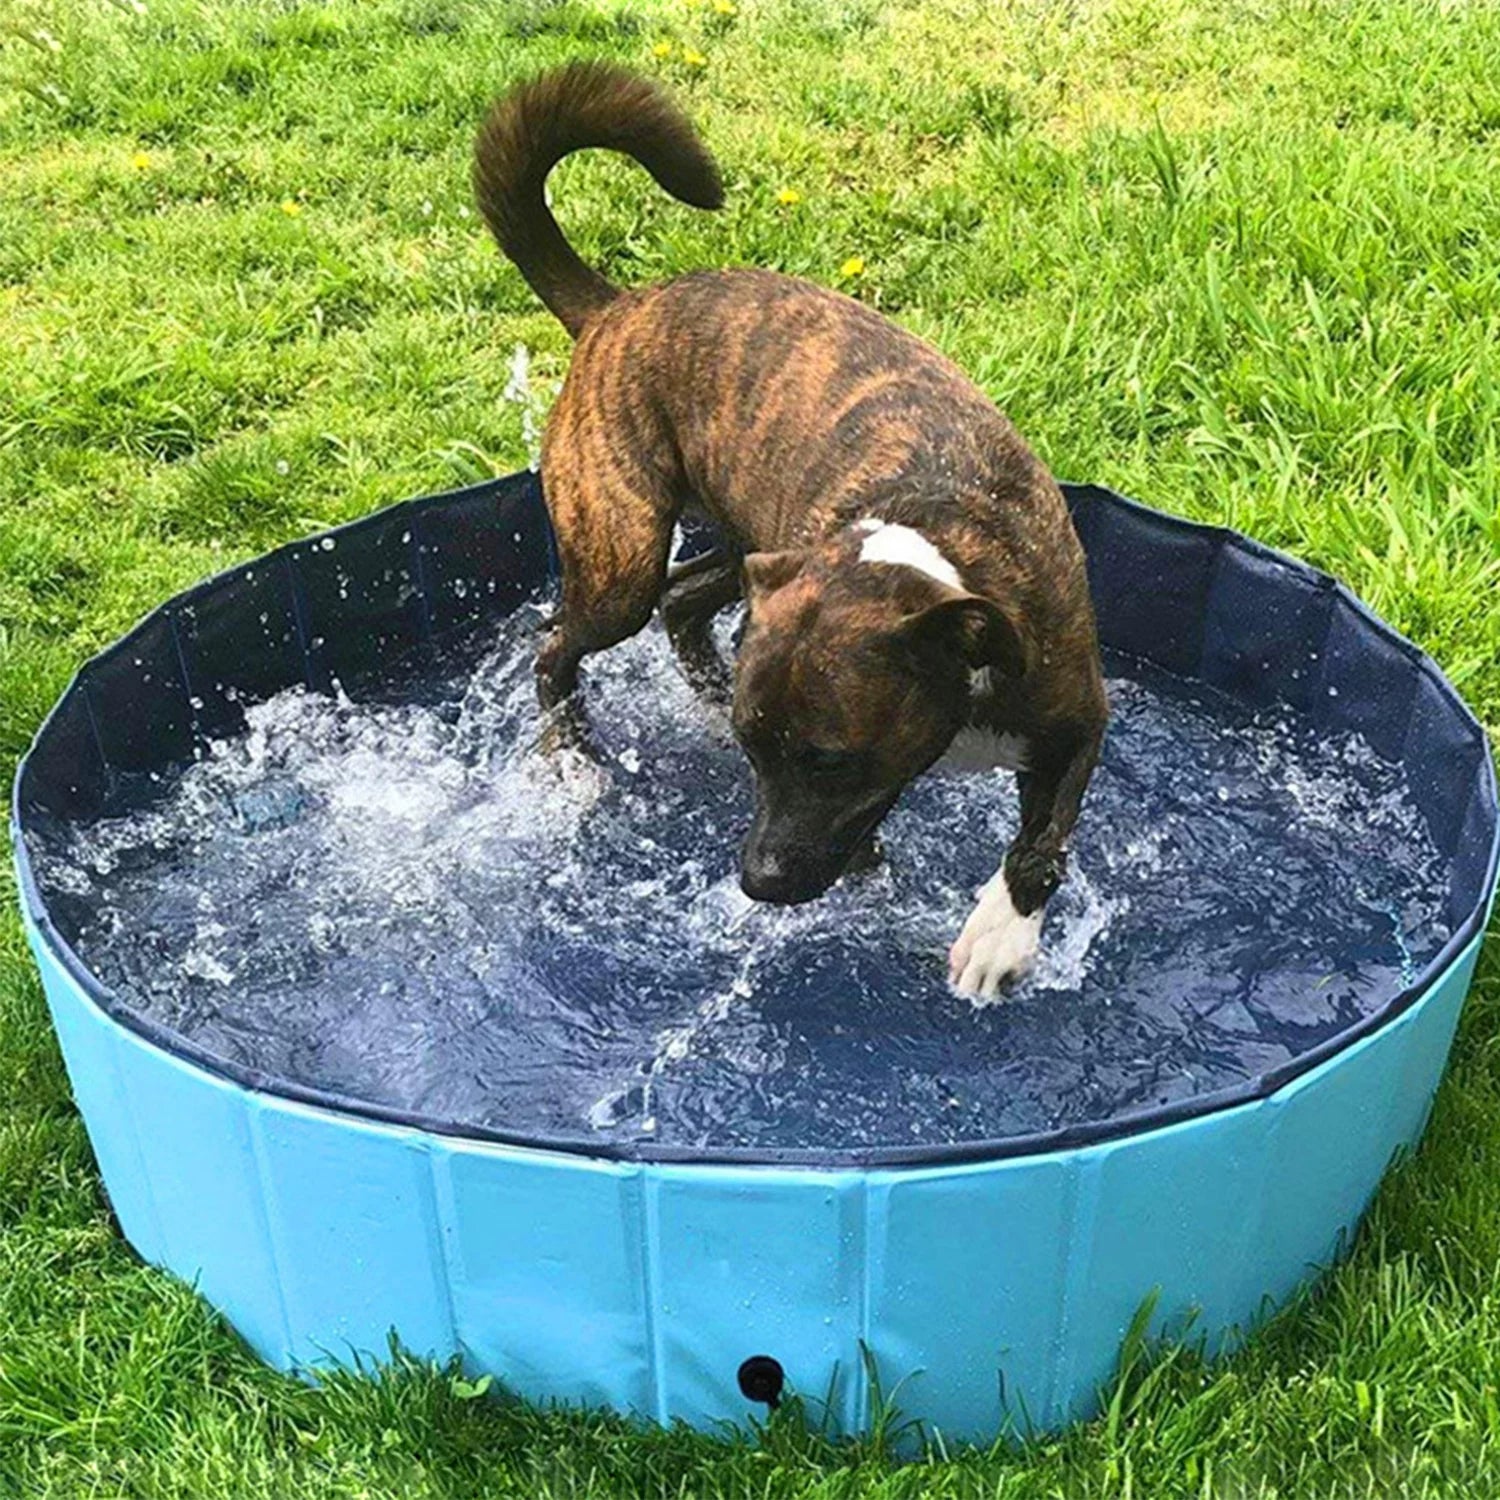 47.2" Foldable Hard Plastic Kiddie Baby Dog Pet Bath Swimming Pool Collapsible Dog Pet Pool Bathing Tub Kiddie Pool for Kids Pets Dogs Cats